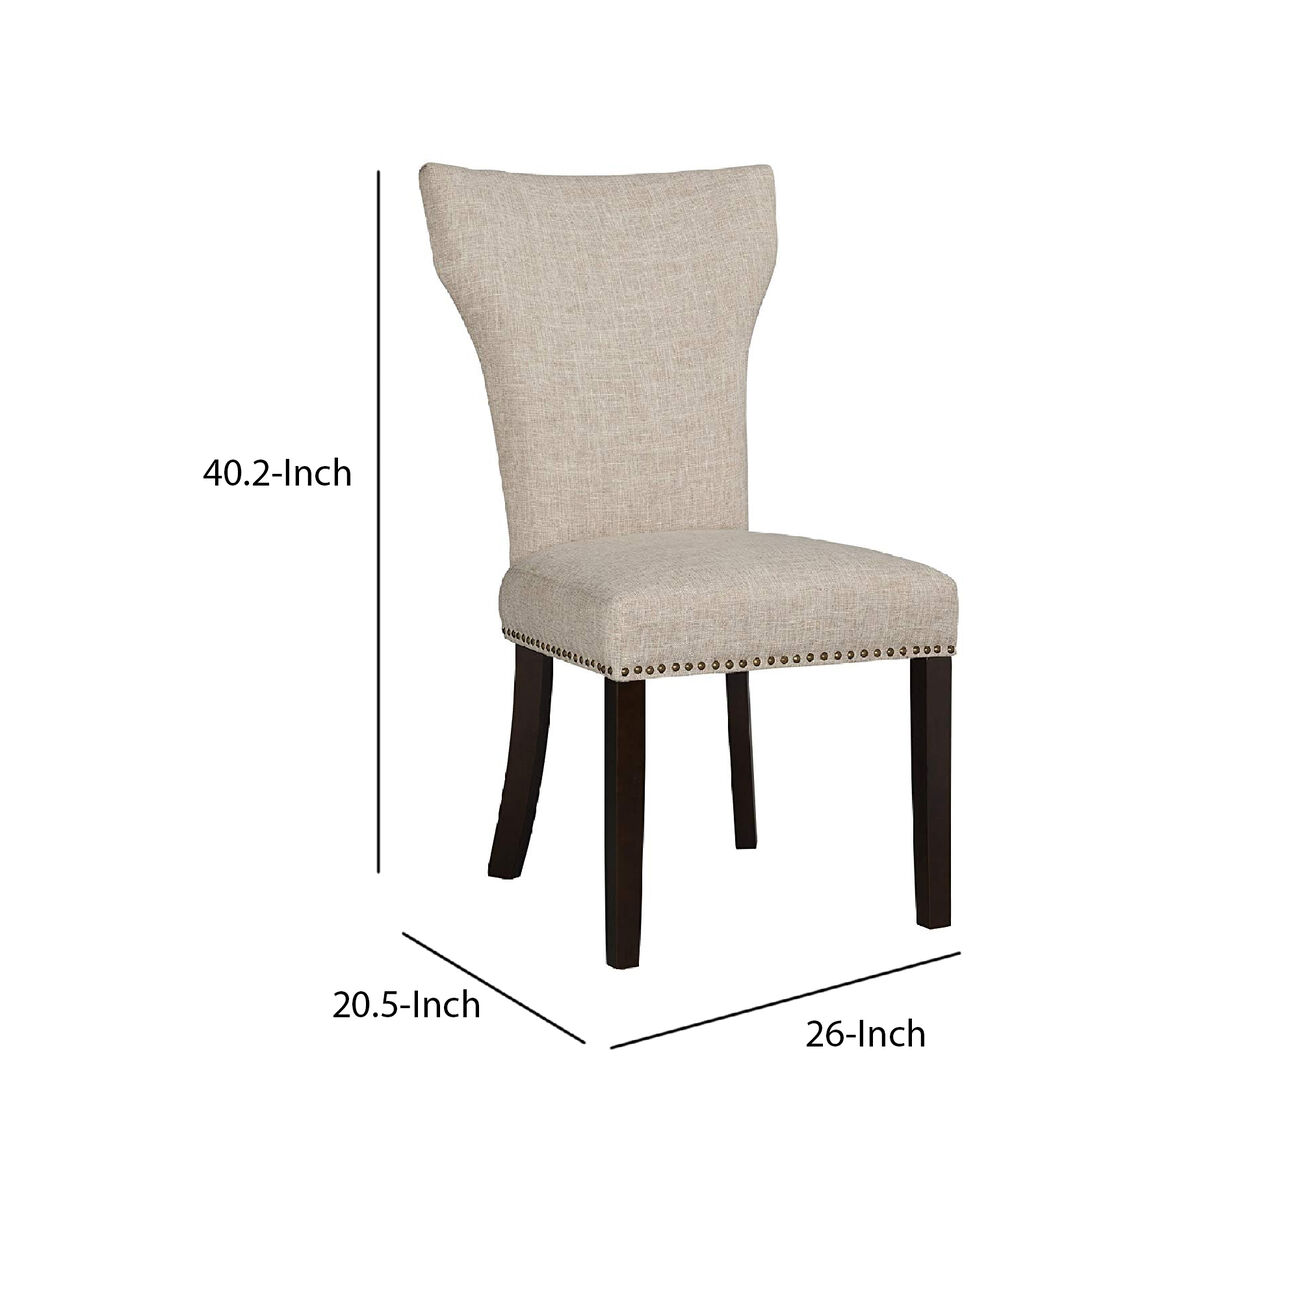 Fabric Upholstered Side Chair with Wingback Design,Set of 2,Beige and Brown